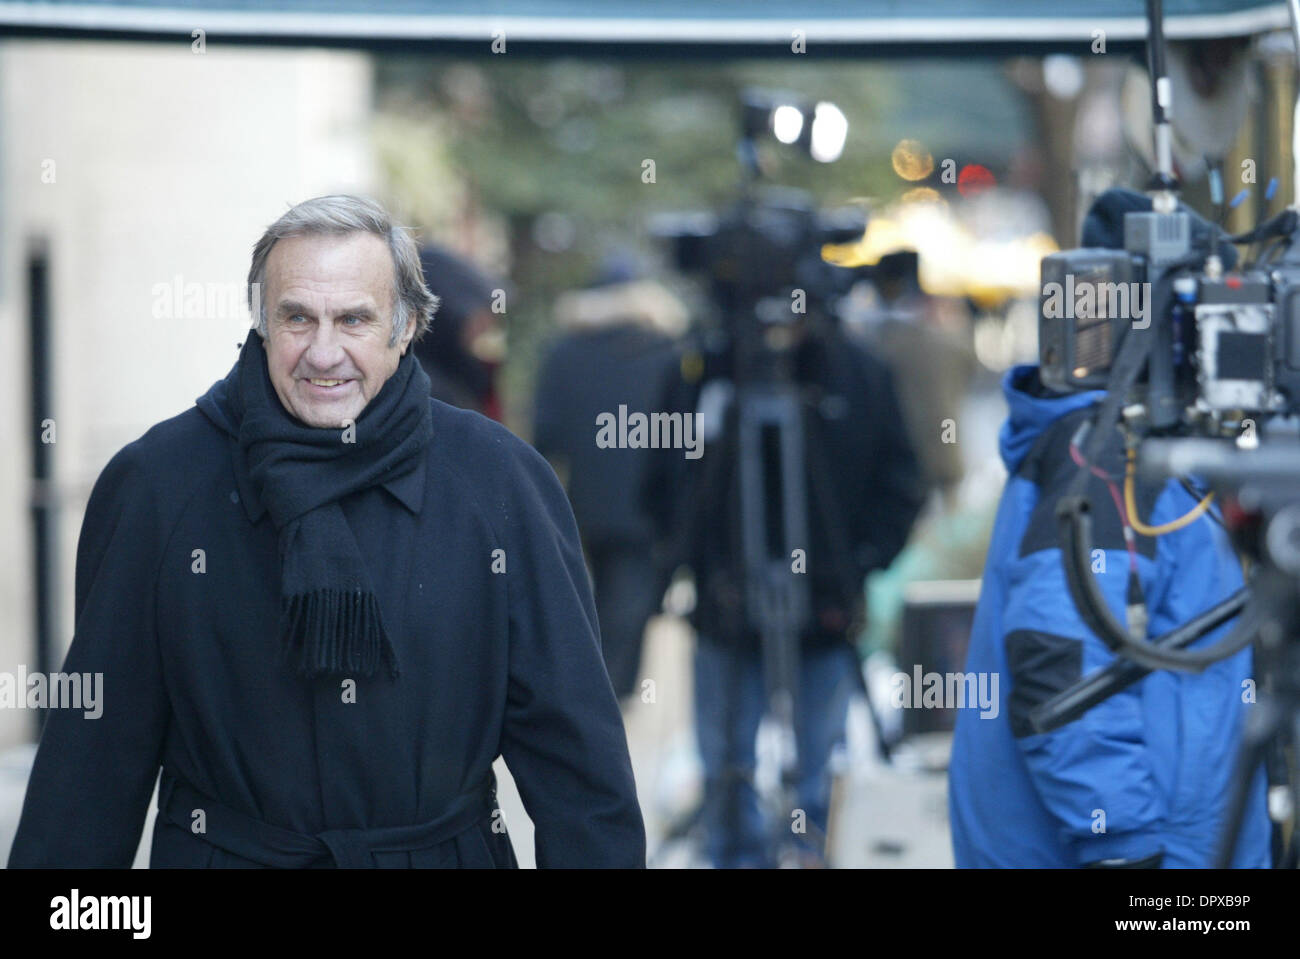 Jan 12, 2009 - Manhattan, New York, USA - CARLOS REUTEMANN nicknamed 'LOLE' chats and smiles with a local cameraman while walking by coincidence by the Bernie Madoff's home along East 64th. St. in New York City. Carlos Reutemann is an Argentine former racing driver (who raced in Formula One from 1972 through 1982), and later a prominent politician in his native province of Santa Fe Stock Photo